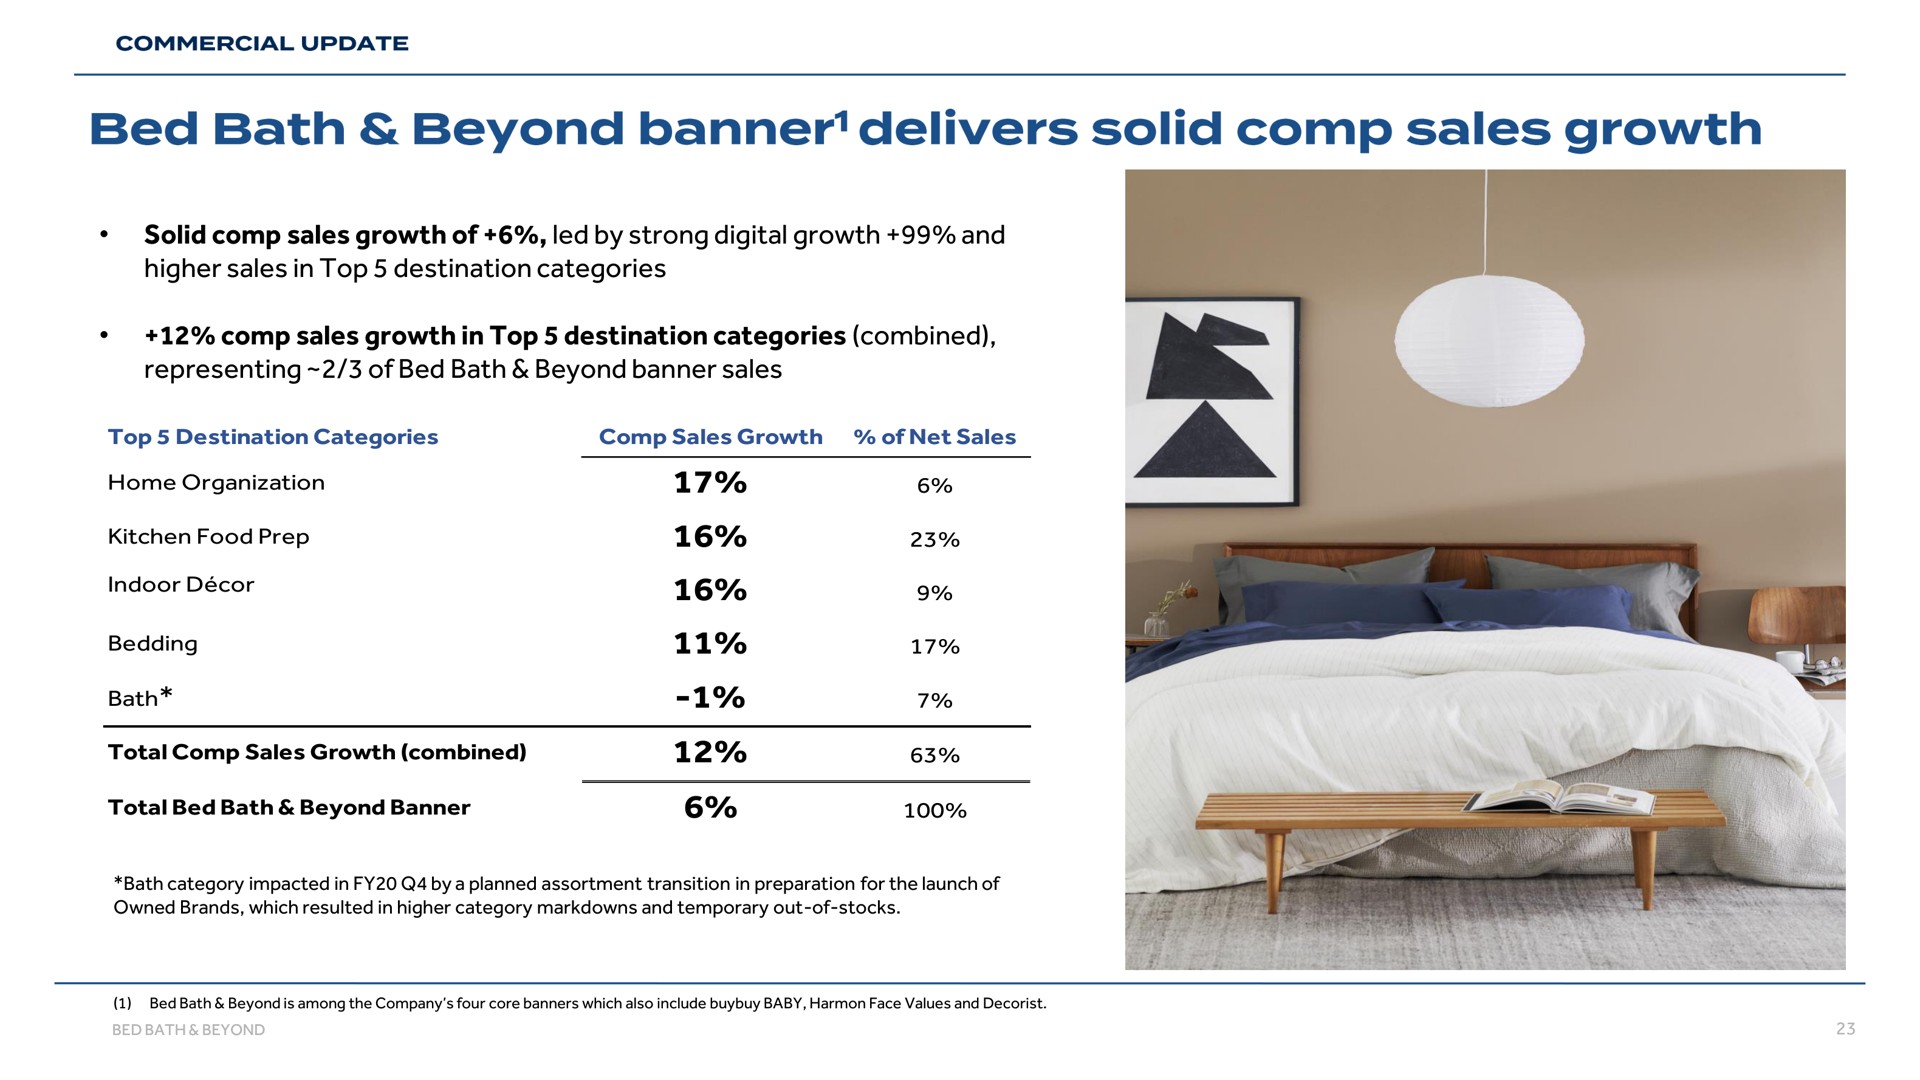 bed bath beyond banner delivers solid sales growth | Bed Bath & Beyond